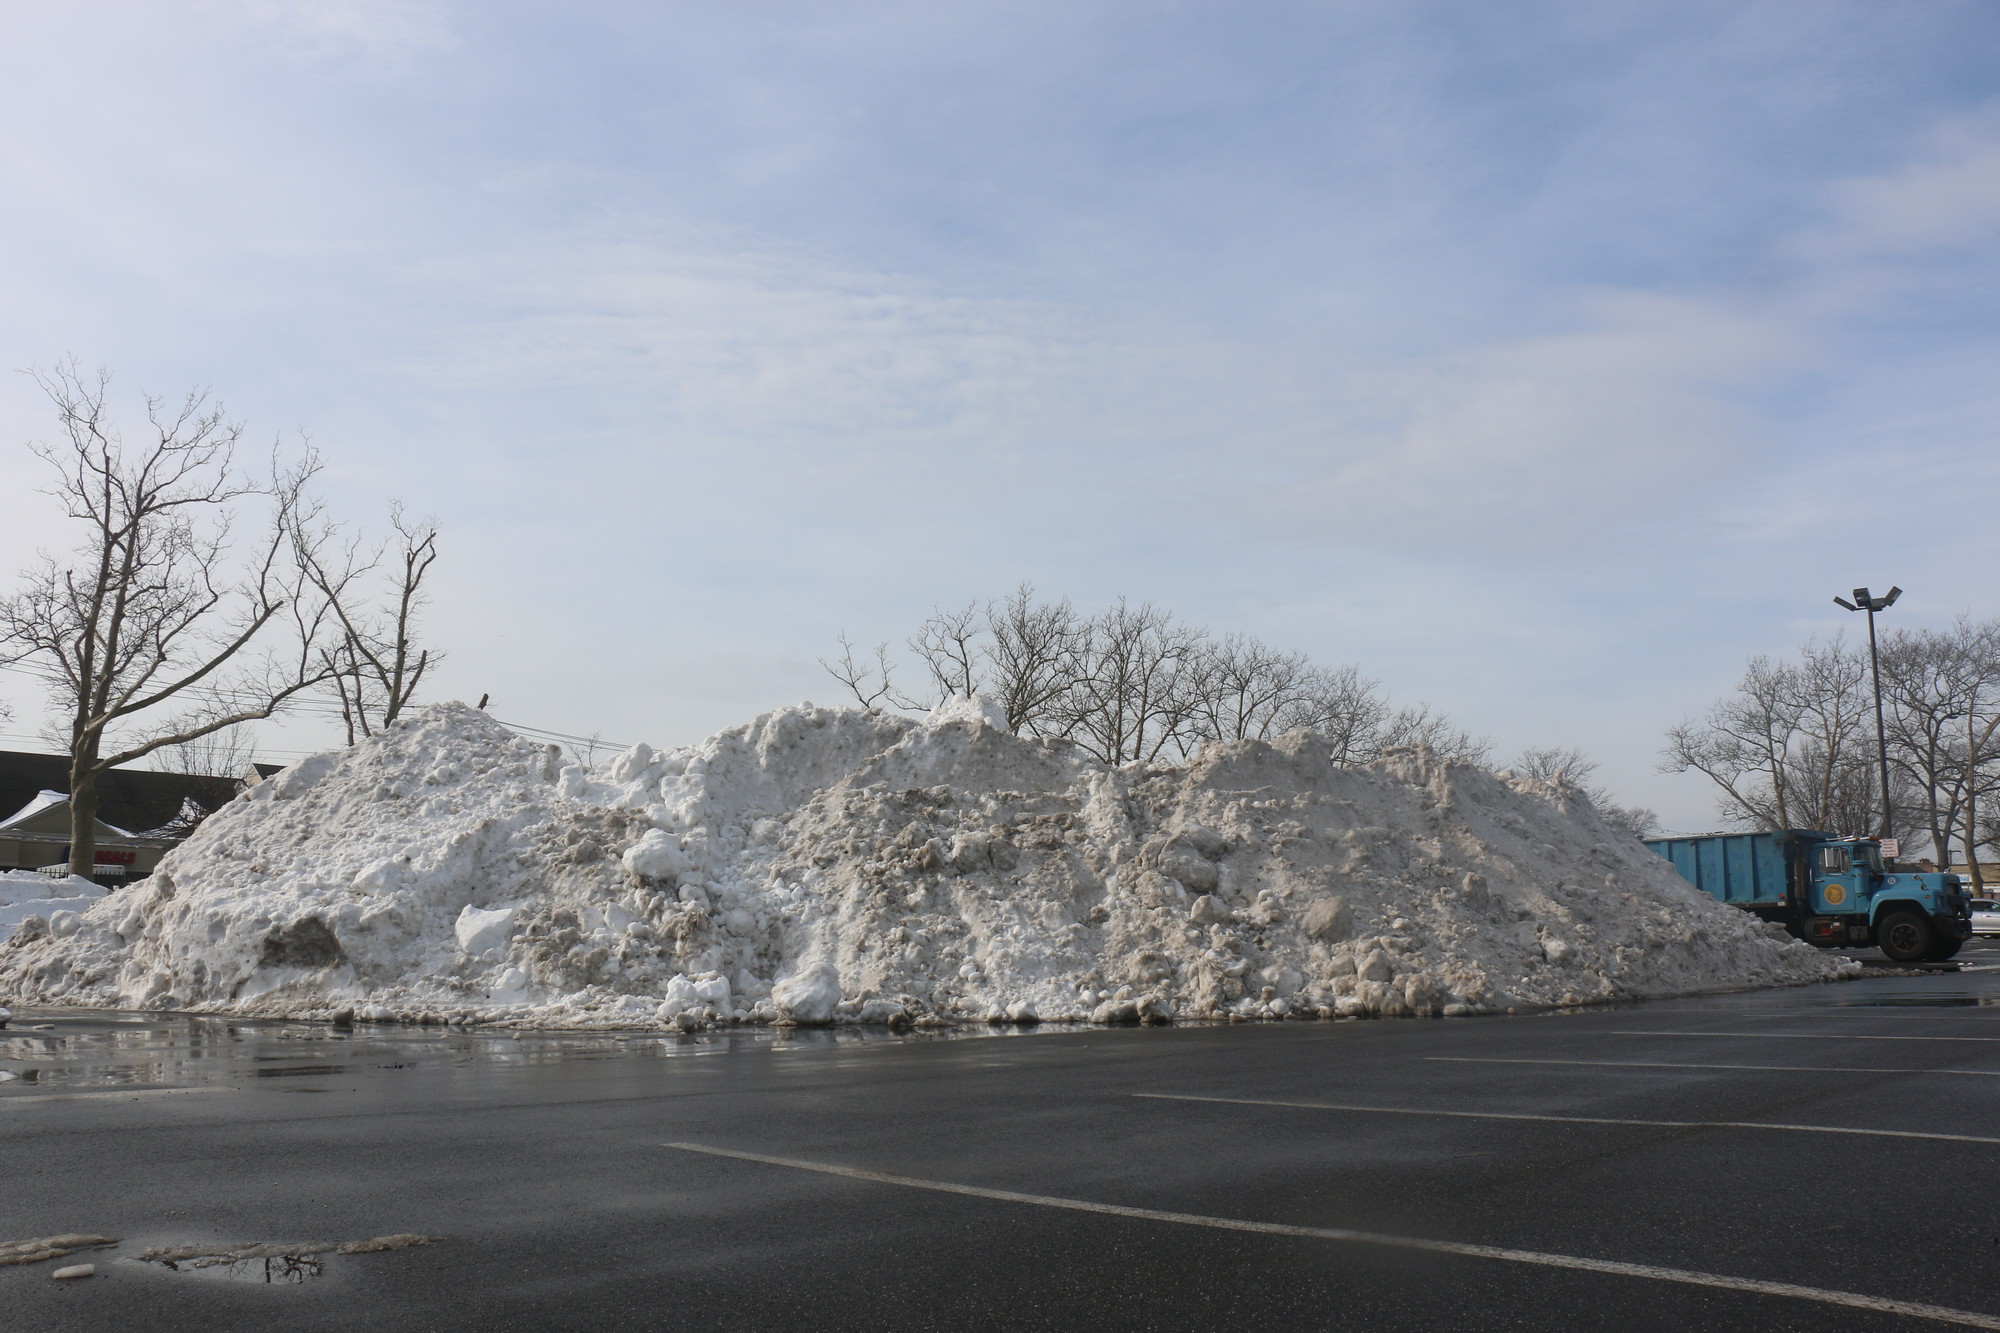 Village crews piled snow in large mounds in the pool complex’s parking lot.